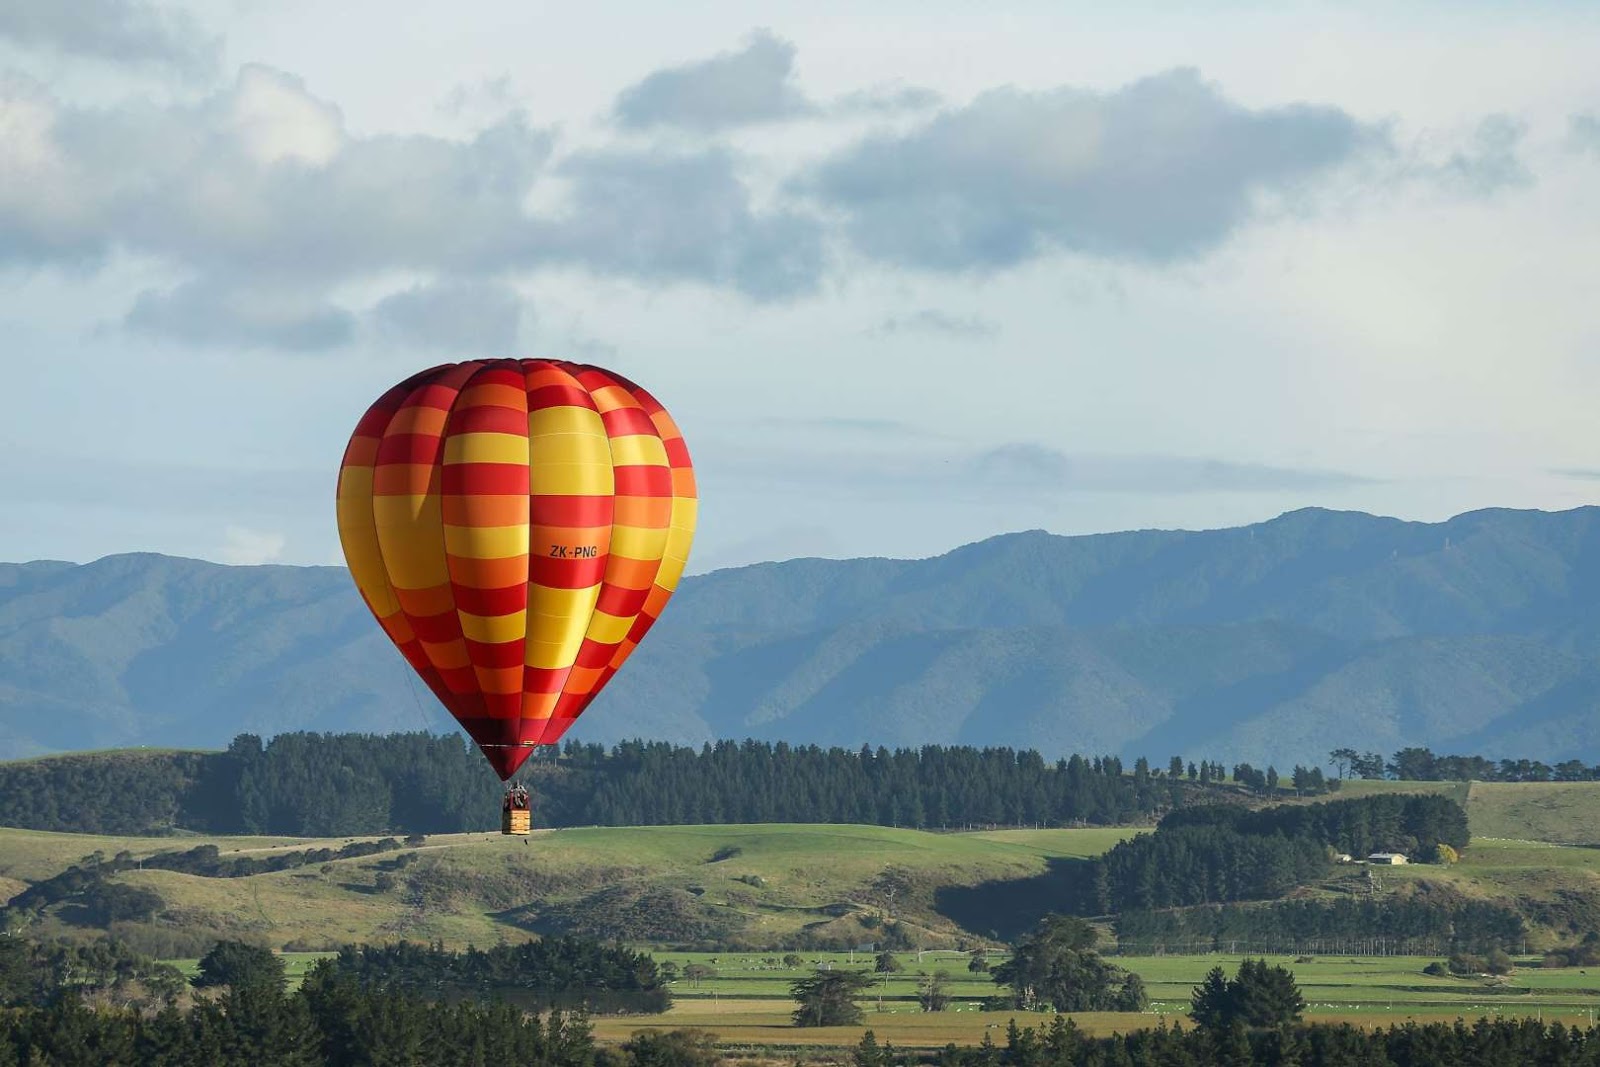 Amazing photos of hot air balloons around the world.